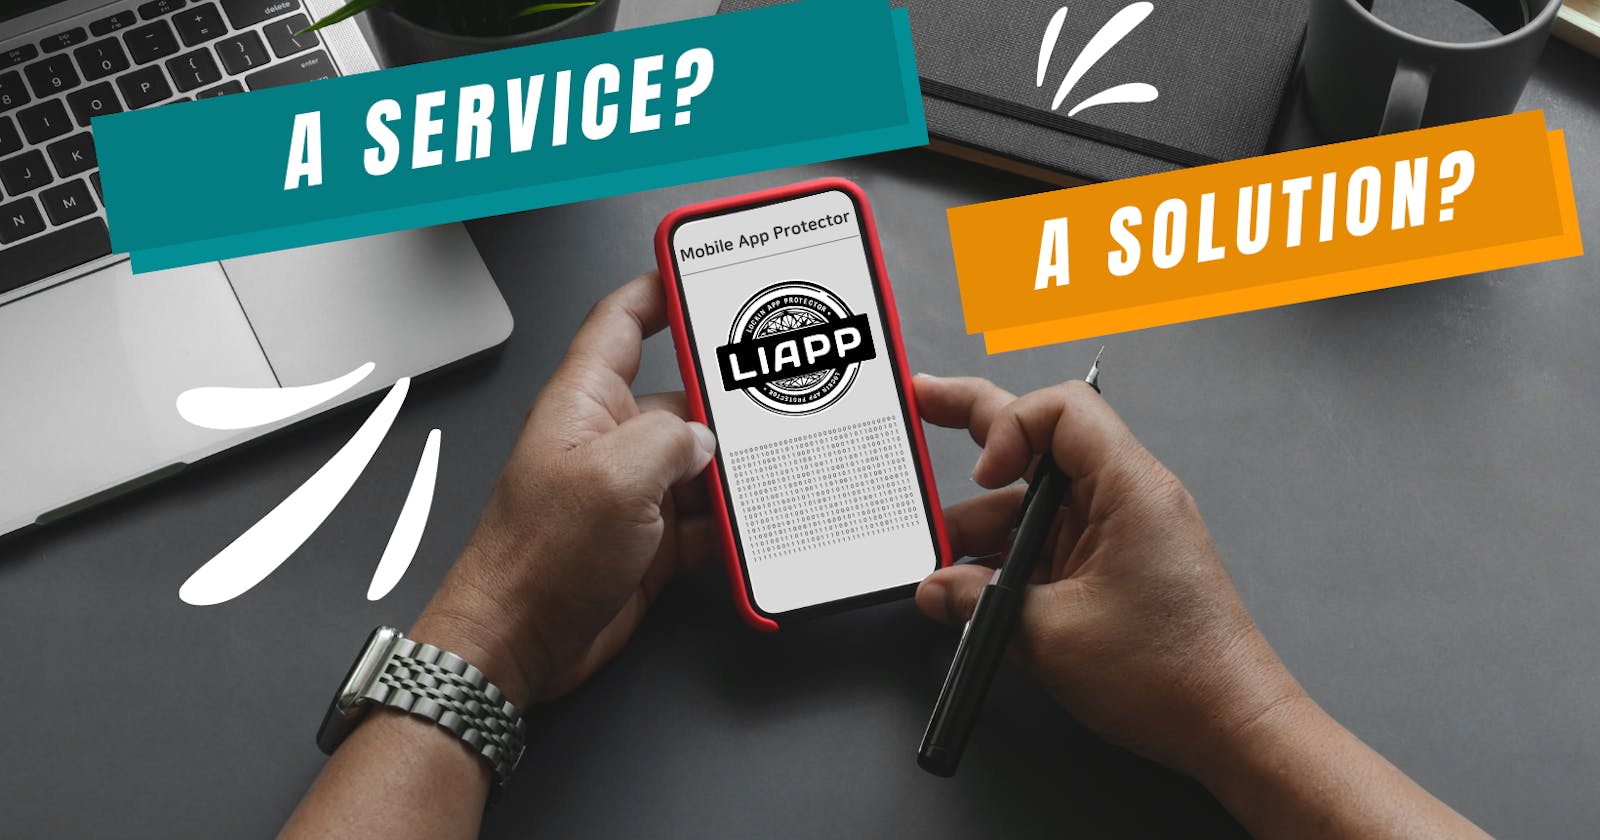 LIAPP, is it a Service? or a Solution?